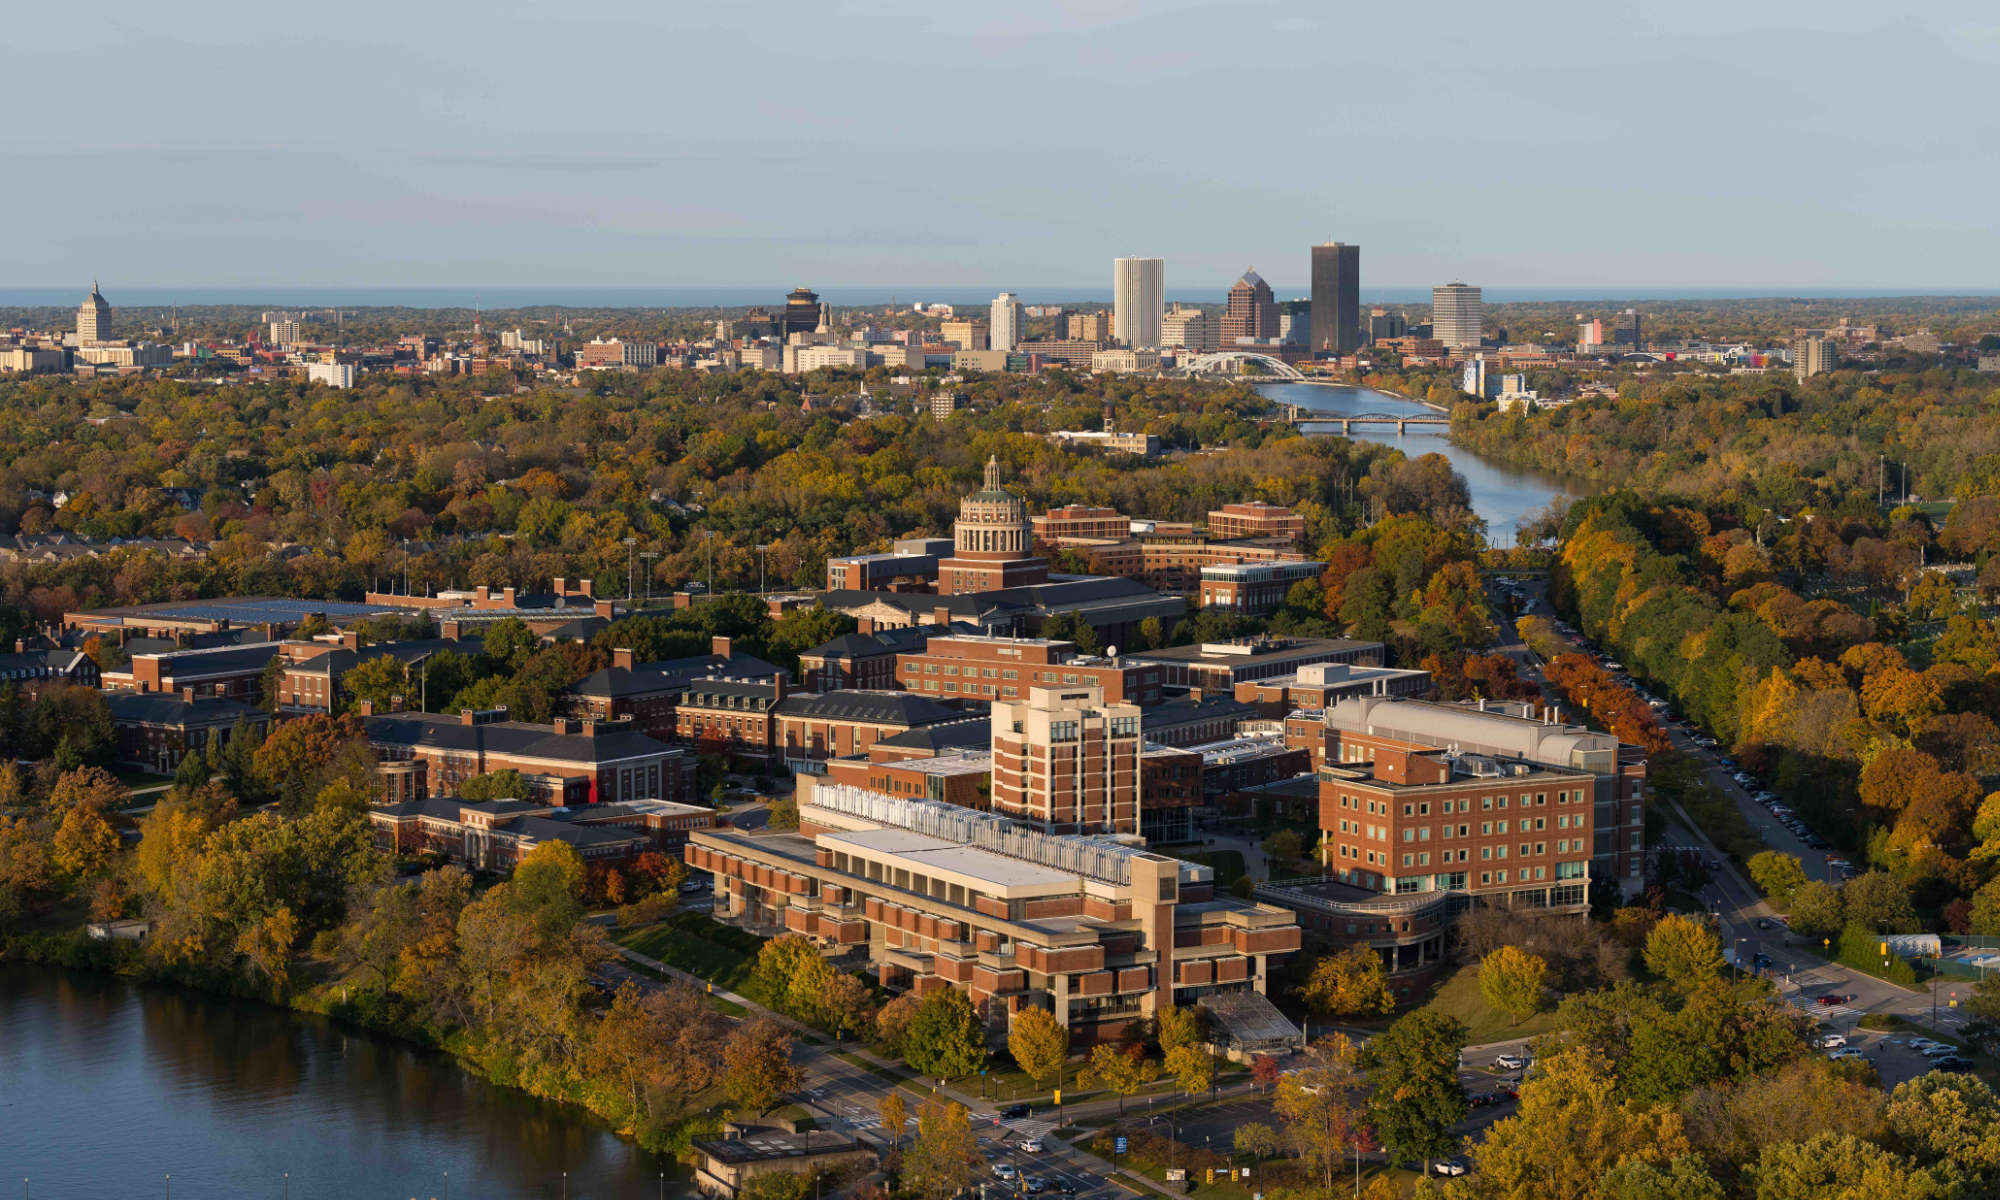 Aerial view of the University of Rochester's River Campus with the City of Rochester skyline in the background and a sliver of the Genesee River in the bottom left corner.